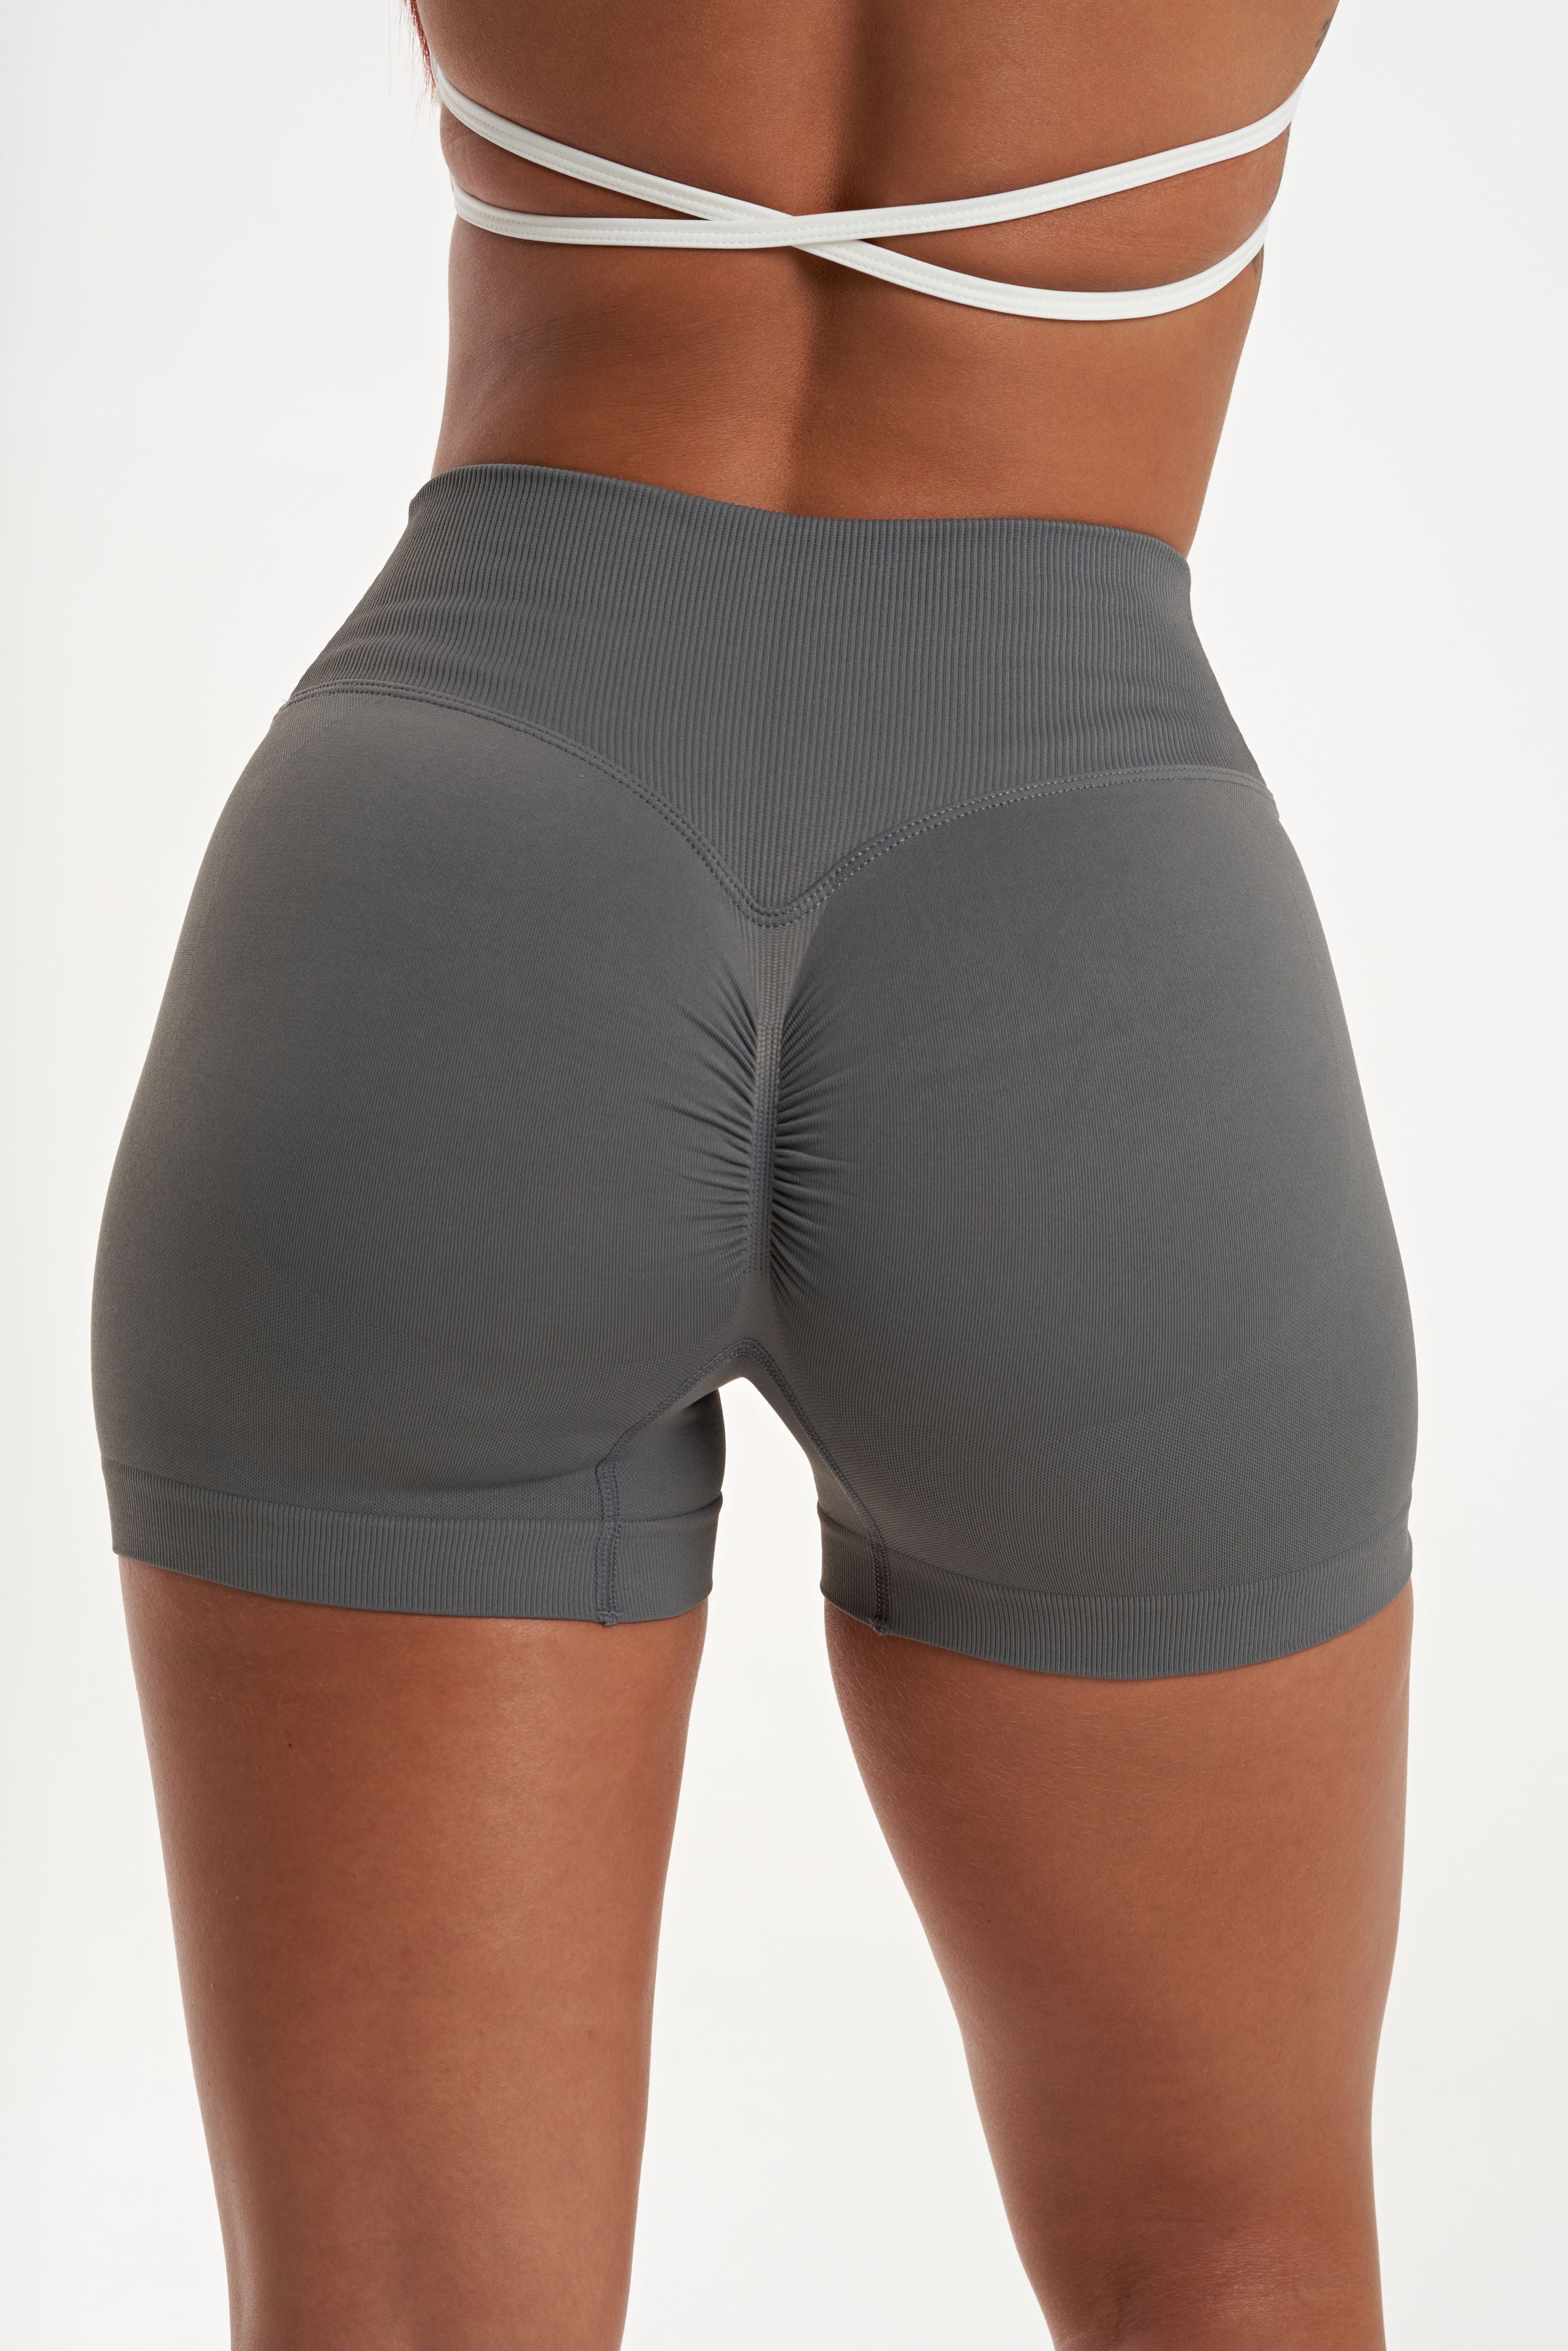 Day-to-day Scrunch Bum Shorts in Grey